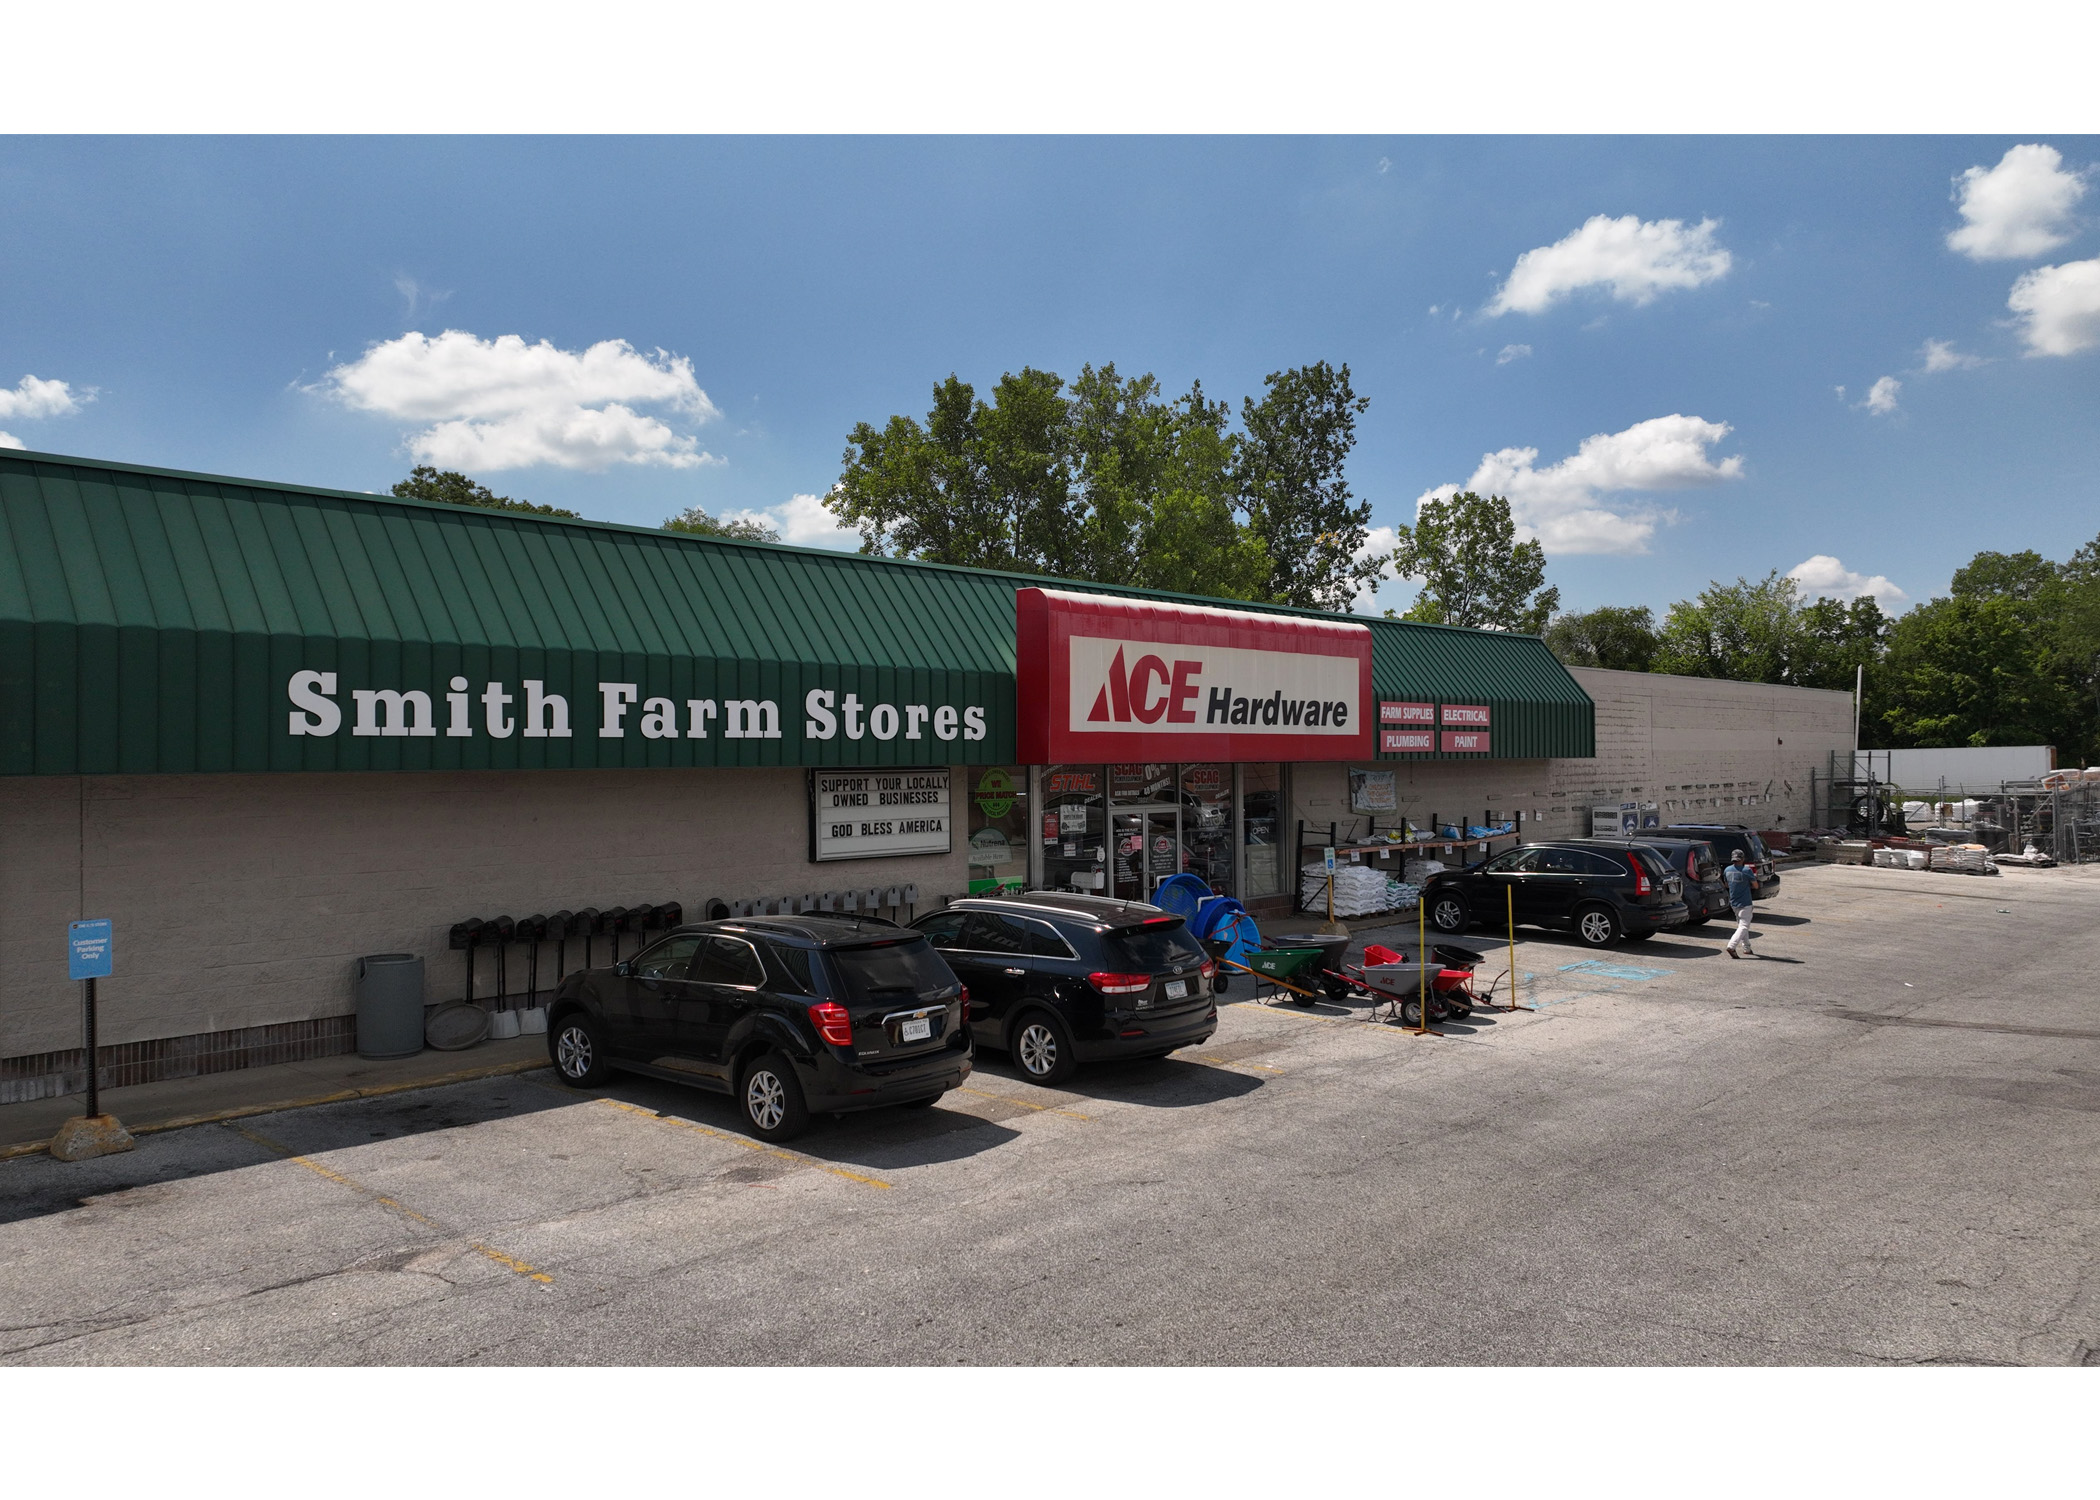 Plymouth Plaza Smith Farm Stores and Ace Hardware.